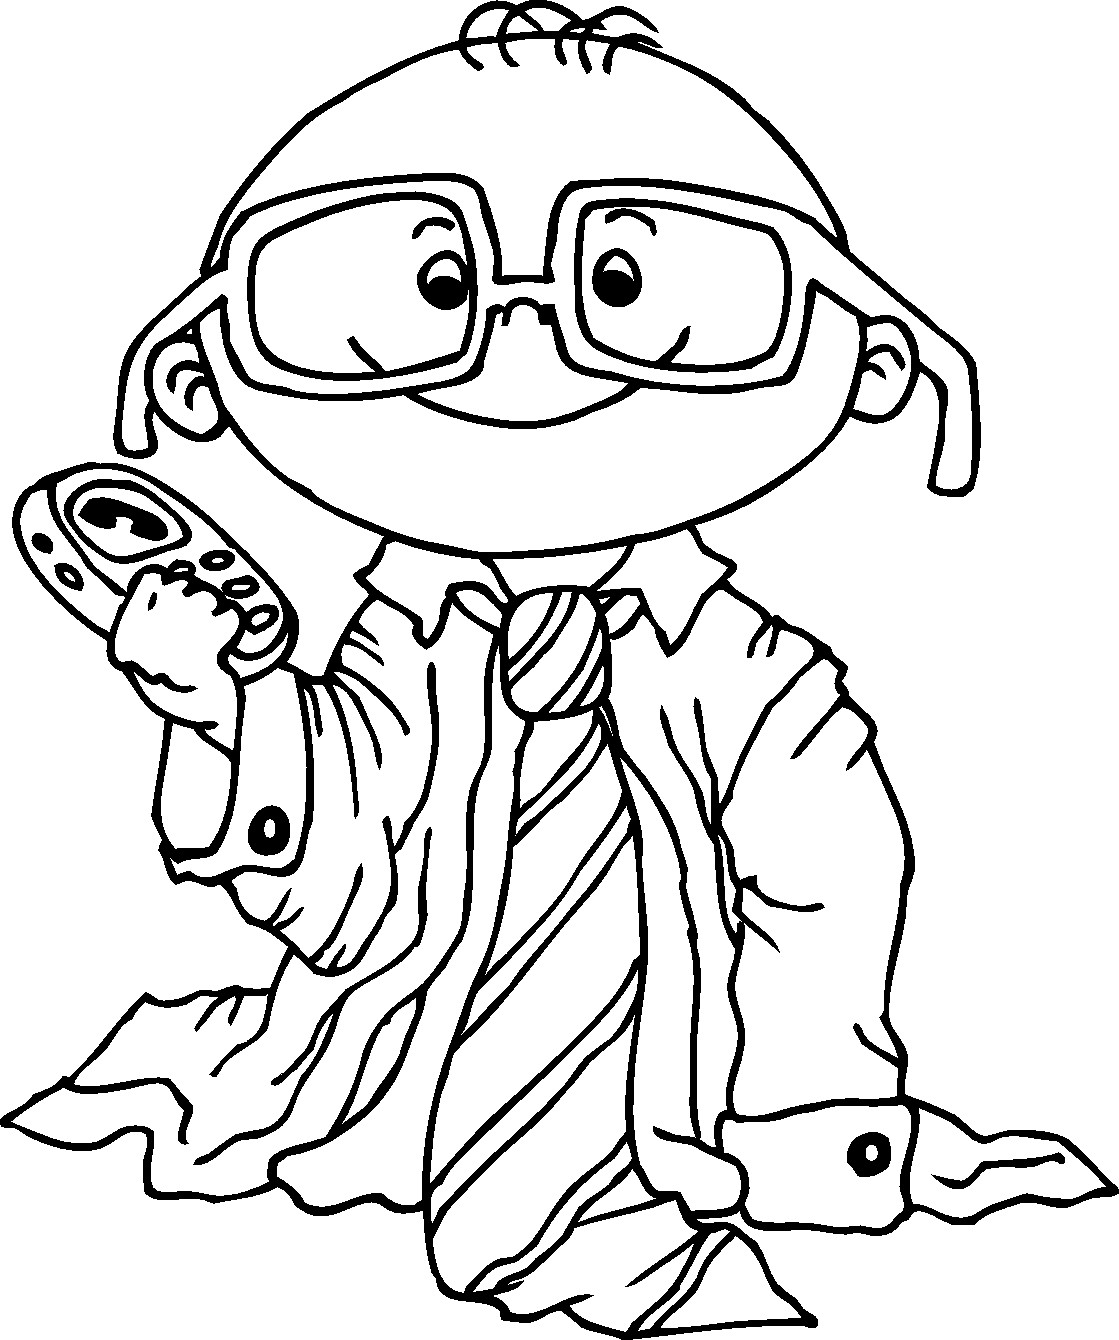 Fun Coloring Pages For Boys
 Cool And Fun Coloring Pages For Teens The Art Jinni